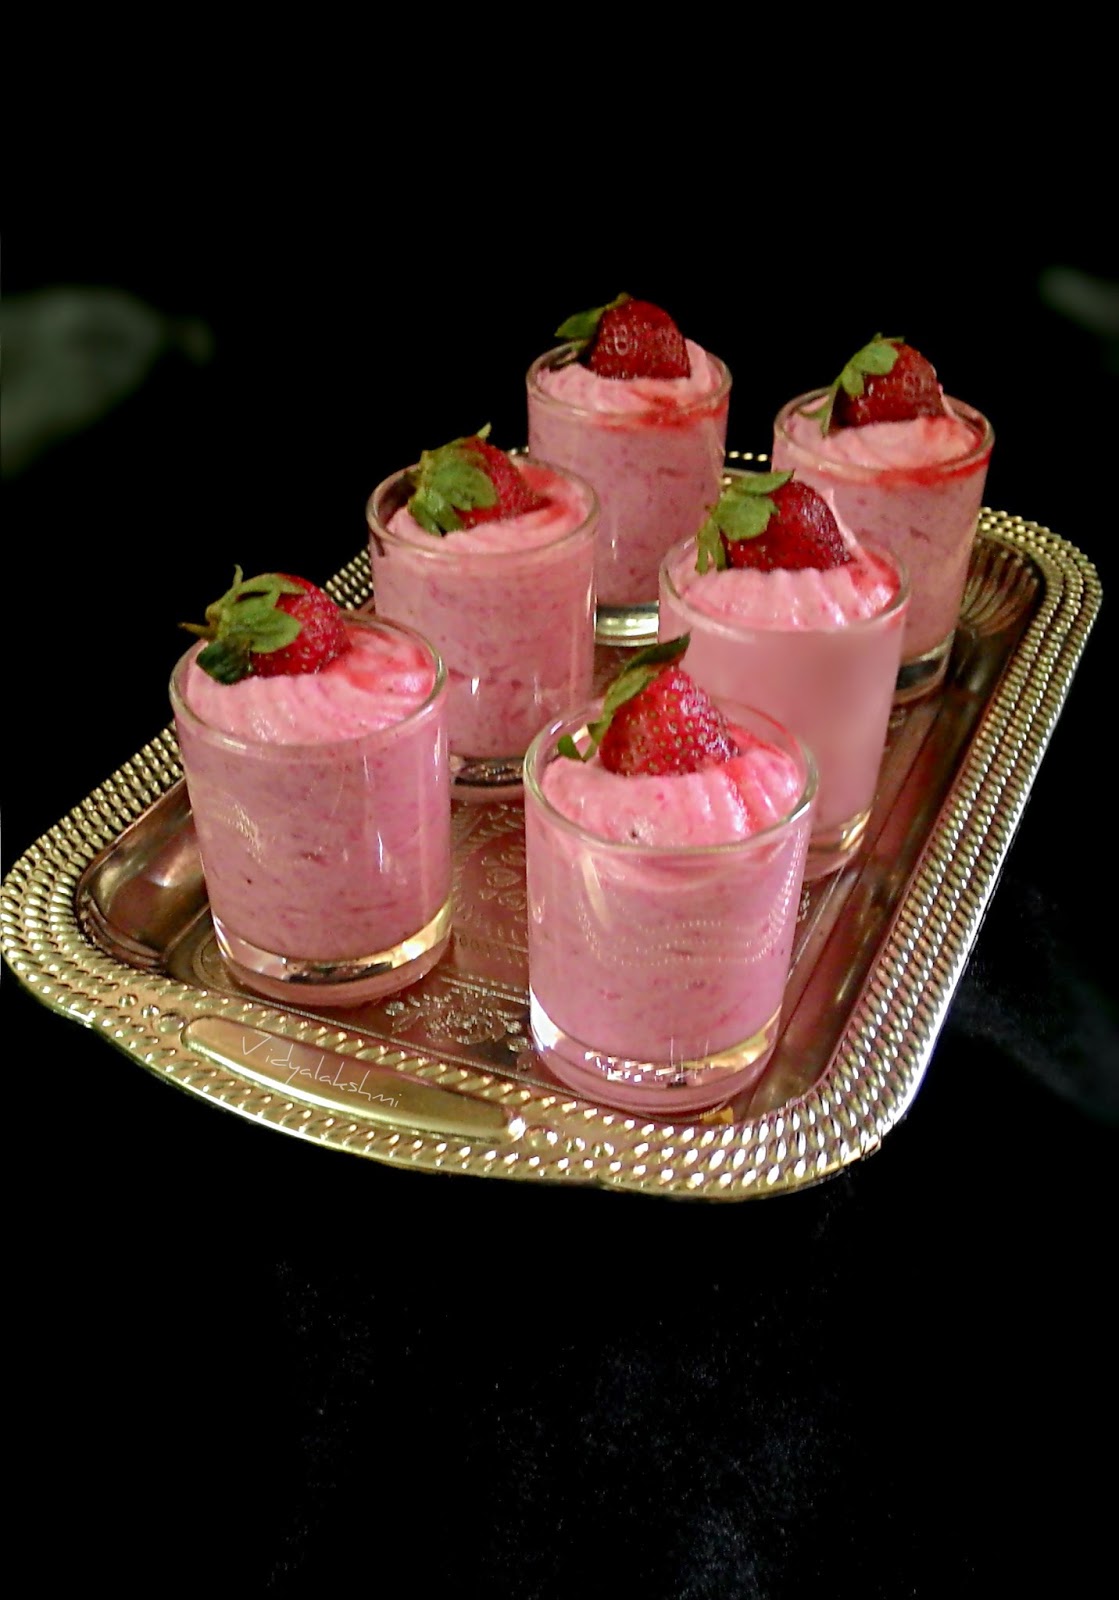 5 Ingredients Strawberry Mousse